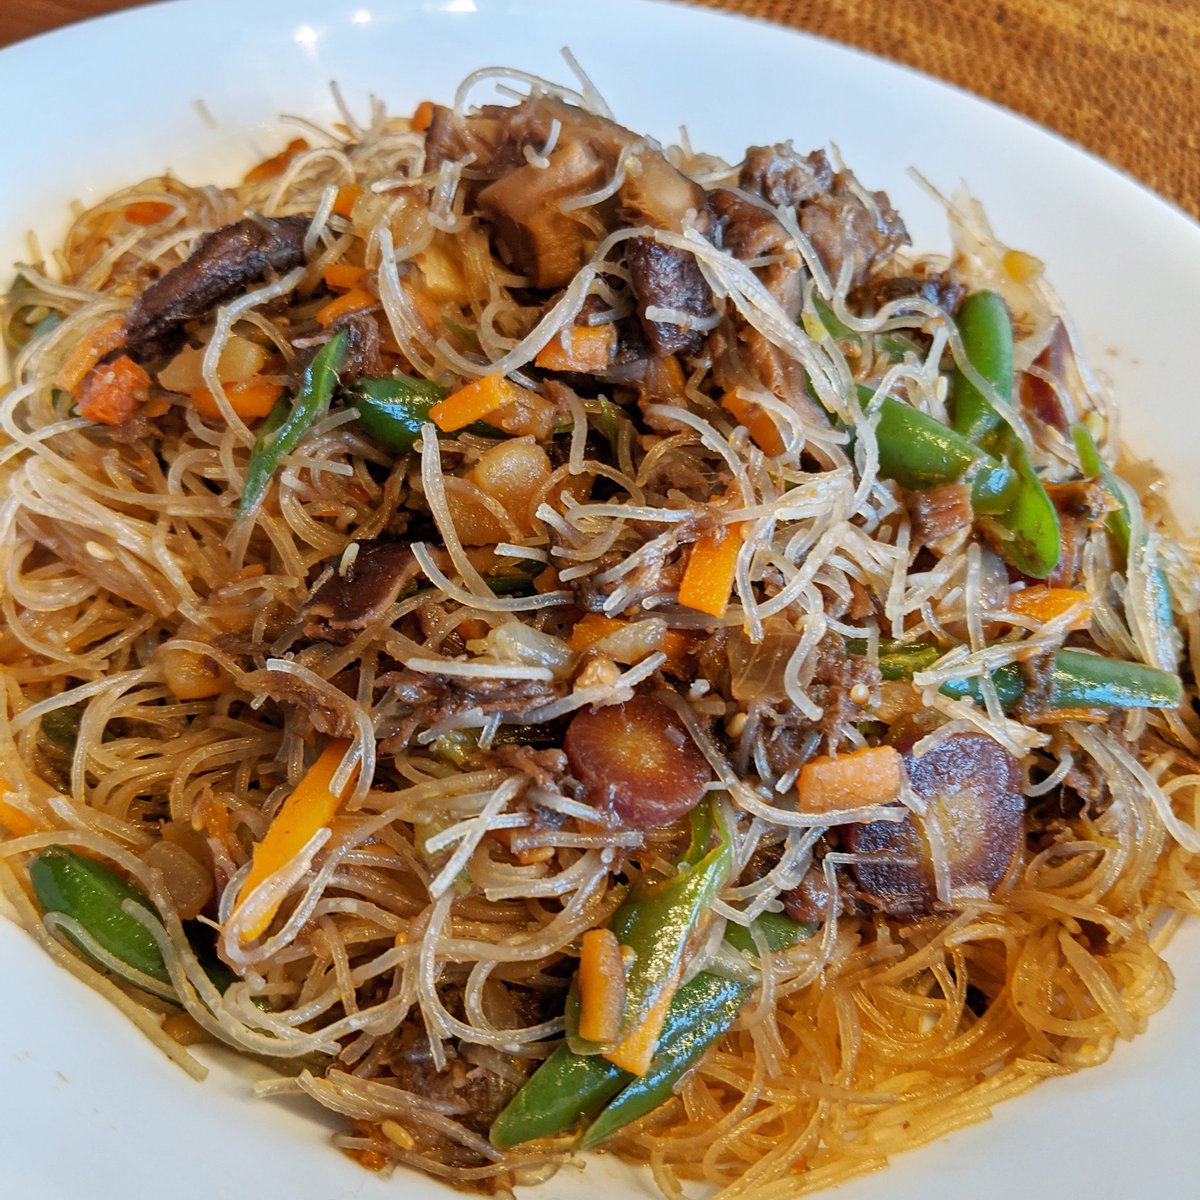 My wife requested pancit, so that's what she got. Things uttered during this meal include:"I have never eaten so well in my life."and"Who needs restaurants, really?"